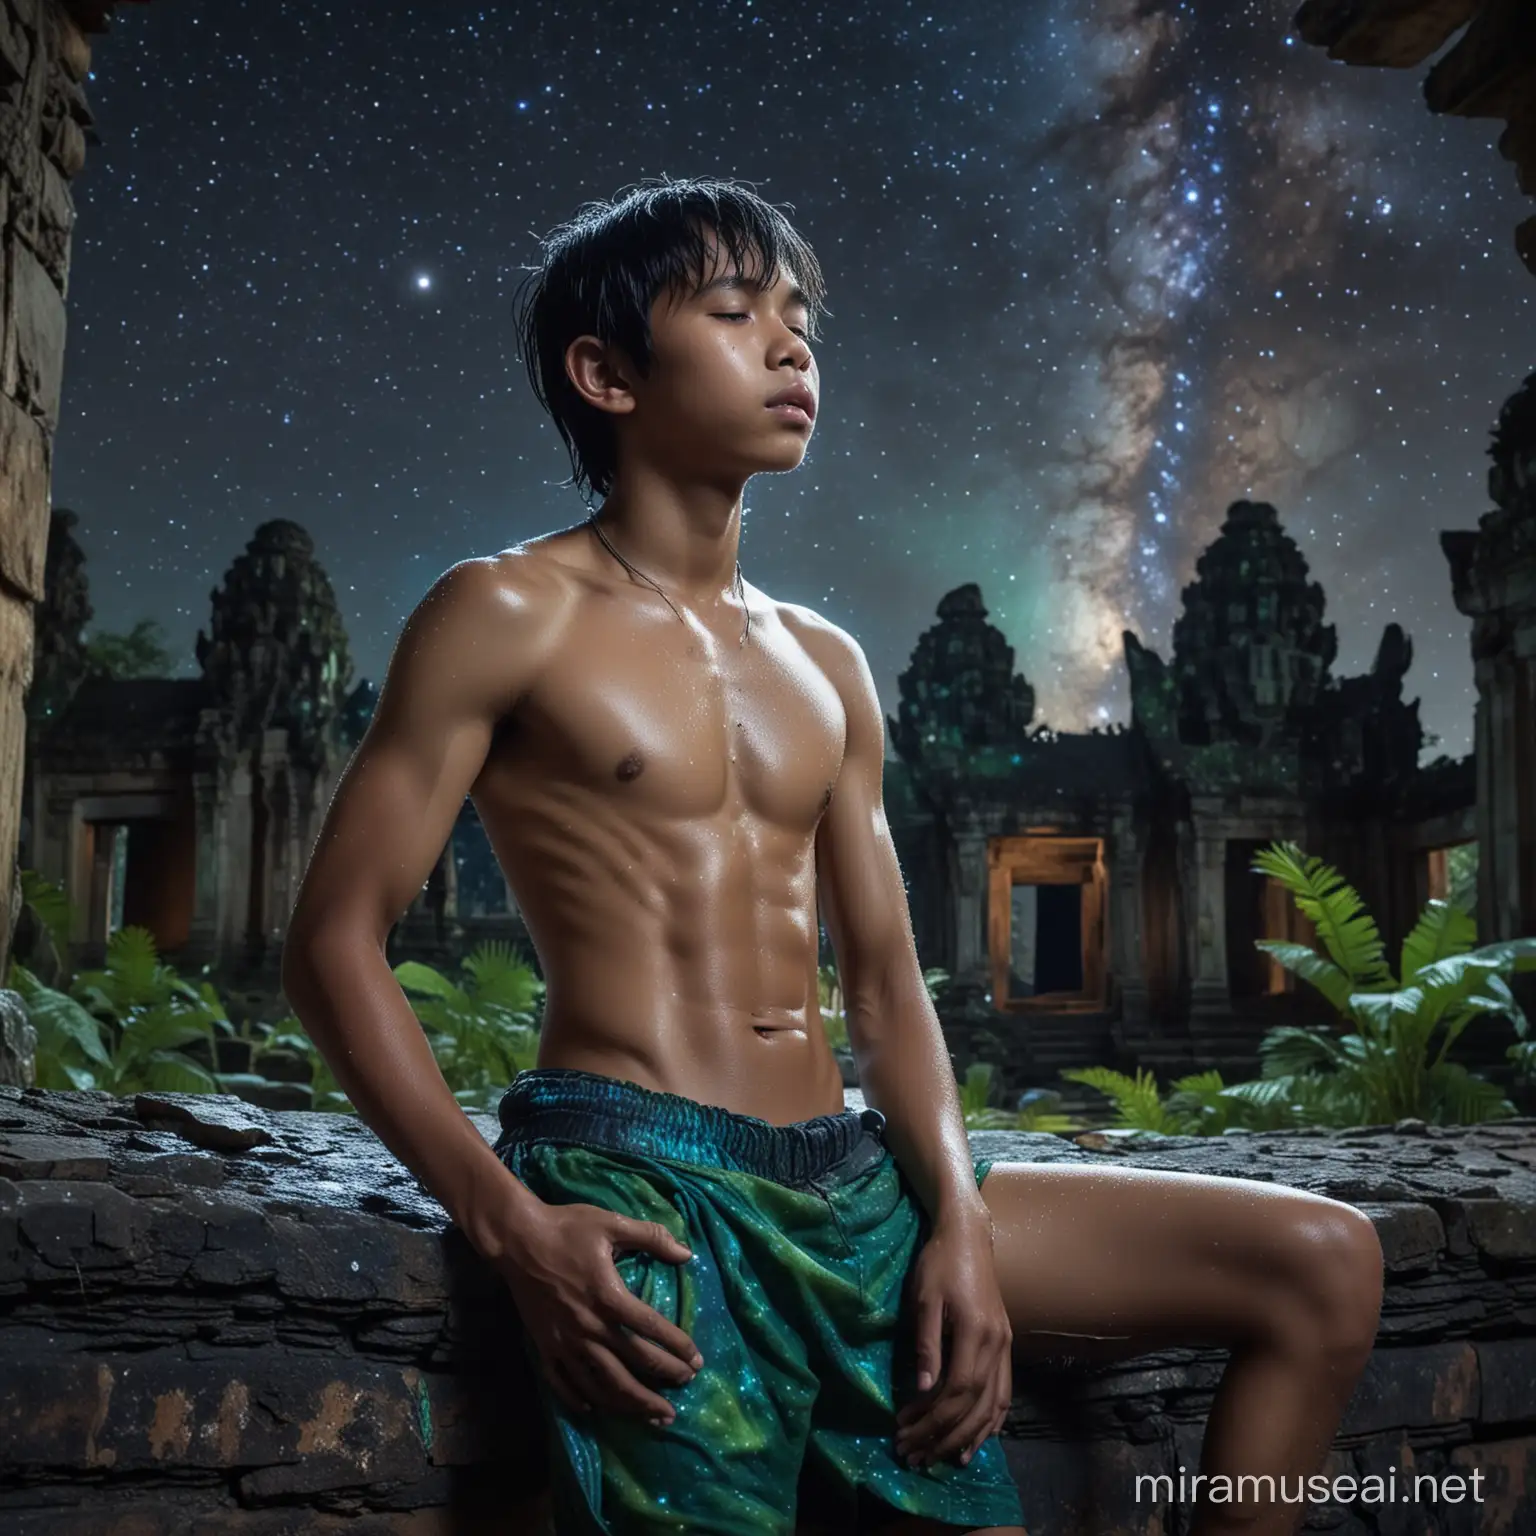 A sexy asian shirtless muscular sweaty wet Mowgli. The boy must be very athletic and muscled. The boy is sleeping in the ruins of a cambodian temple in a jungle. At night. With blue and green neon colors ambient. The sky is full of stars with a huge galaxy.